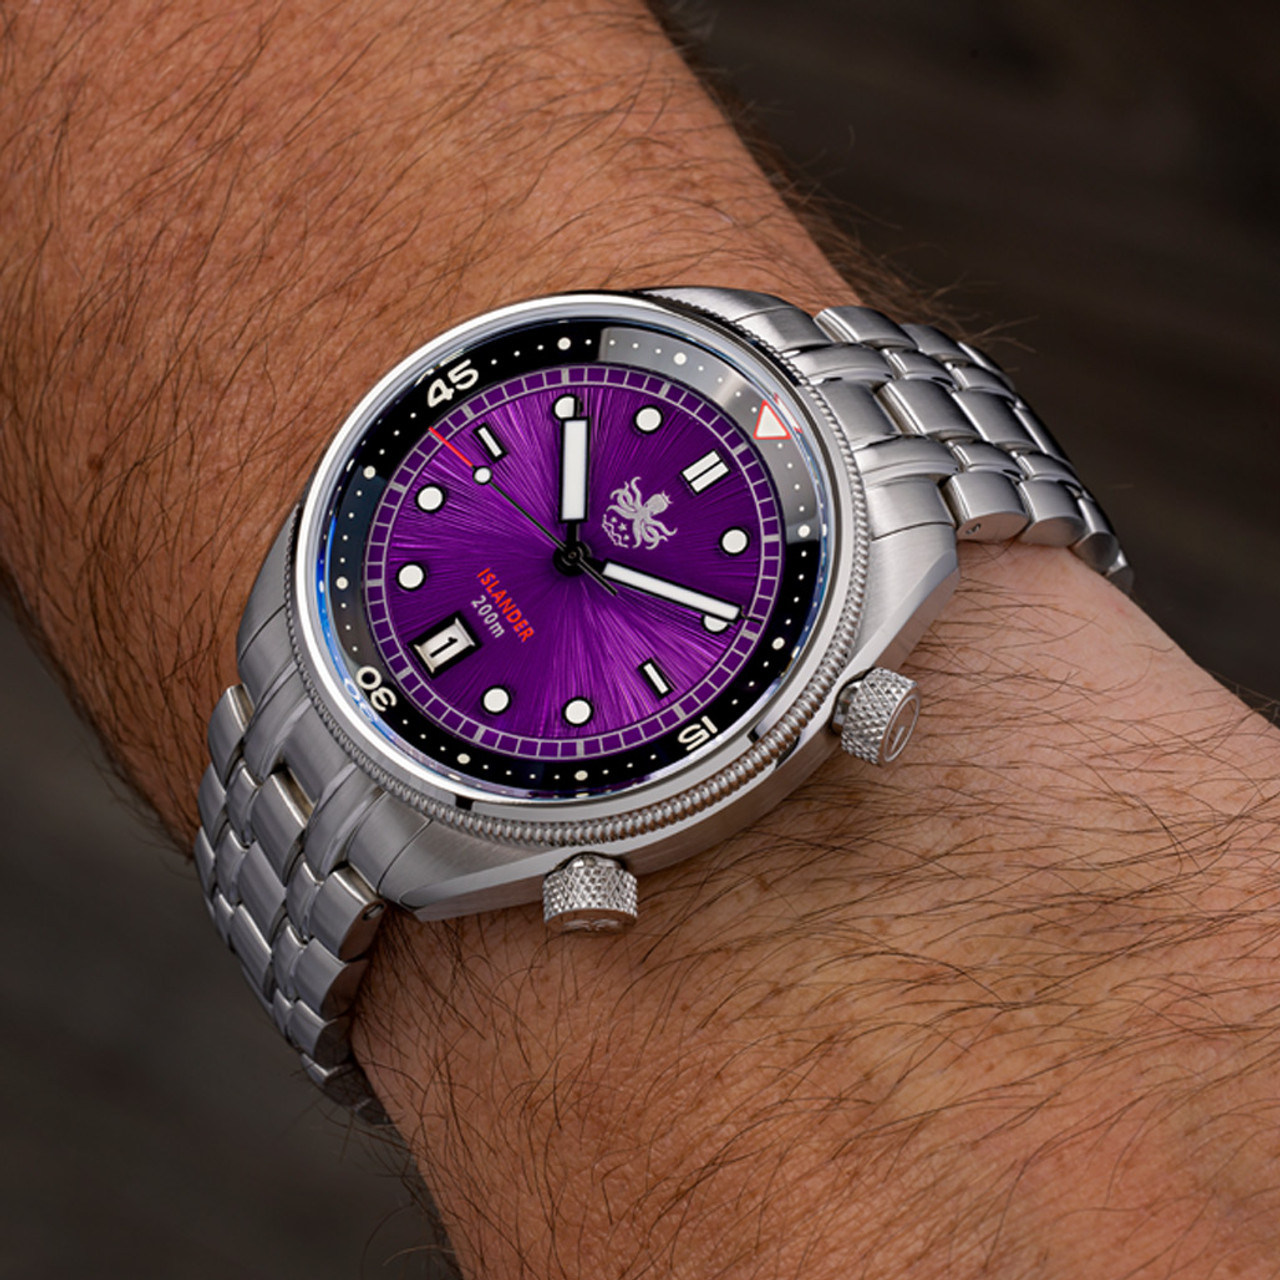 PHOIBOS x ISLANDER Limited Edition Eagle Ray Dive Watch with Sunburst  Purple Dial #PY039-LIW22